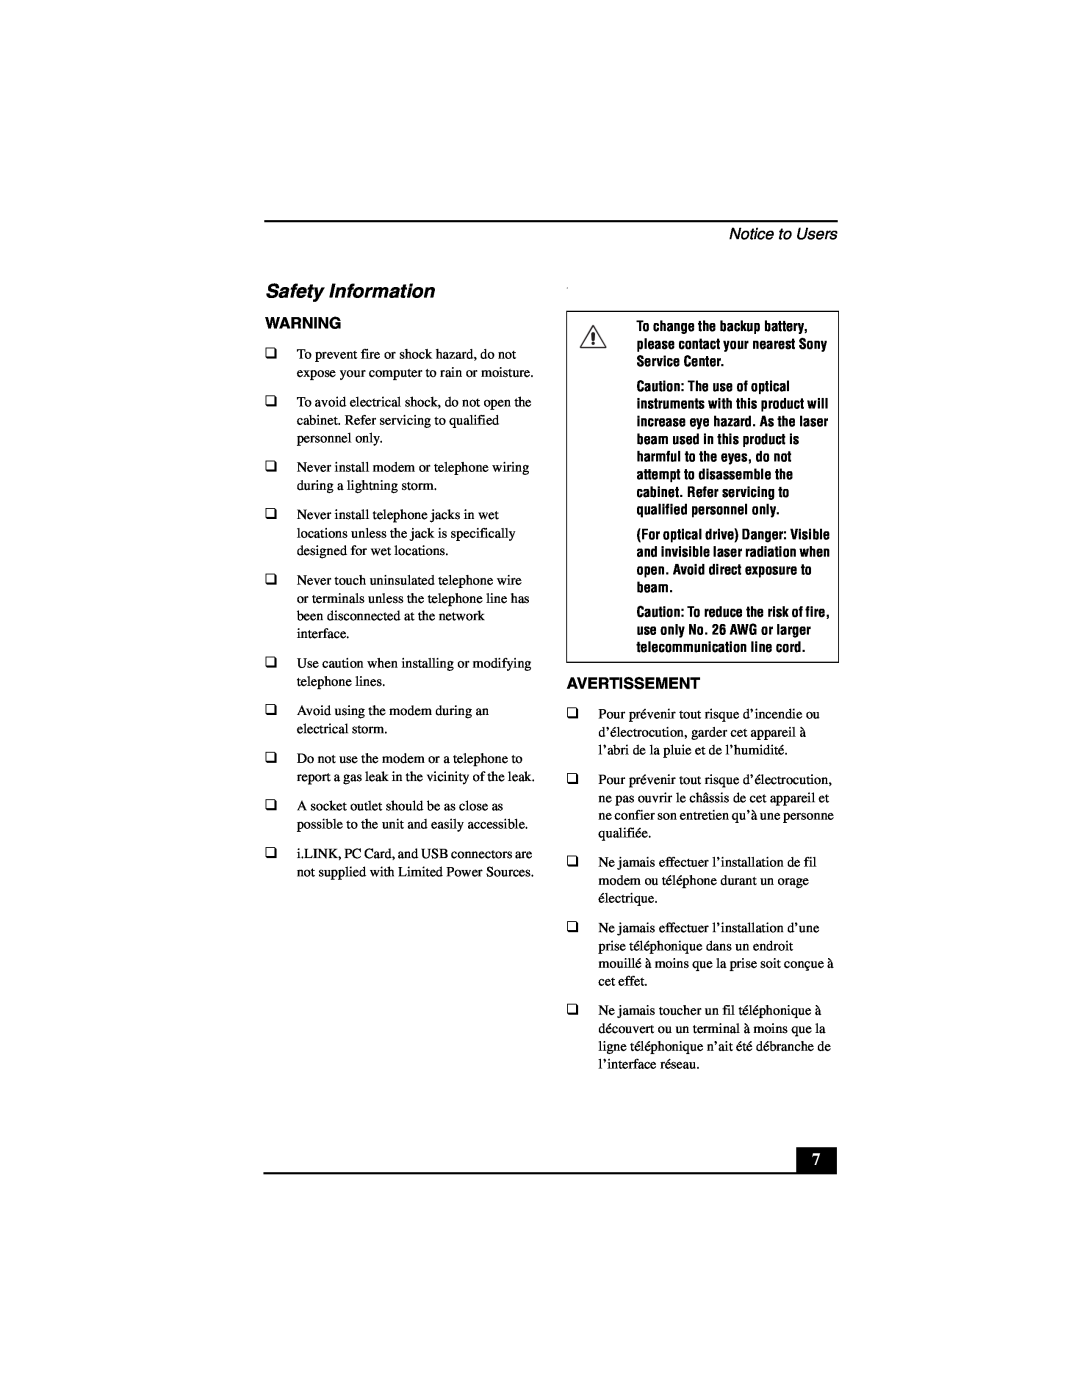 Sony PCG-GRT100 quick start Safety Information, Notice to Users, Avertissement 